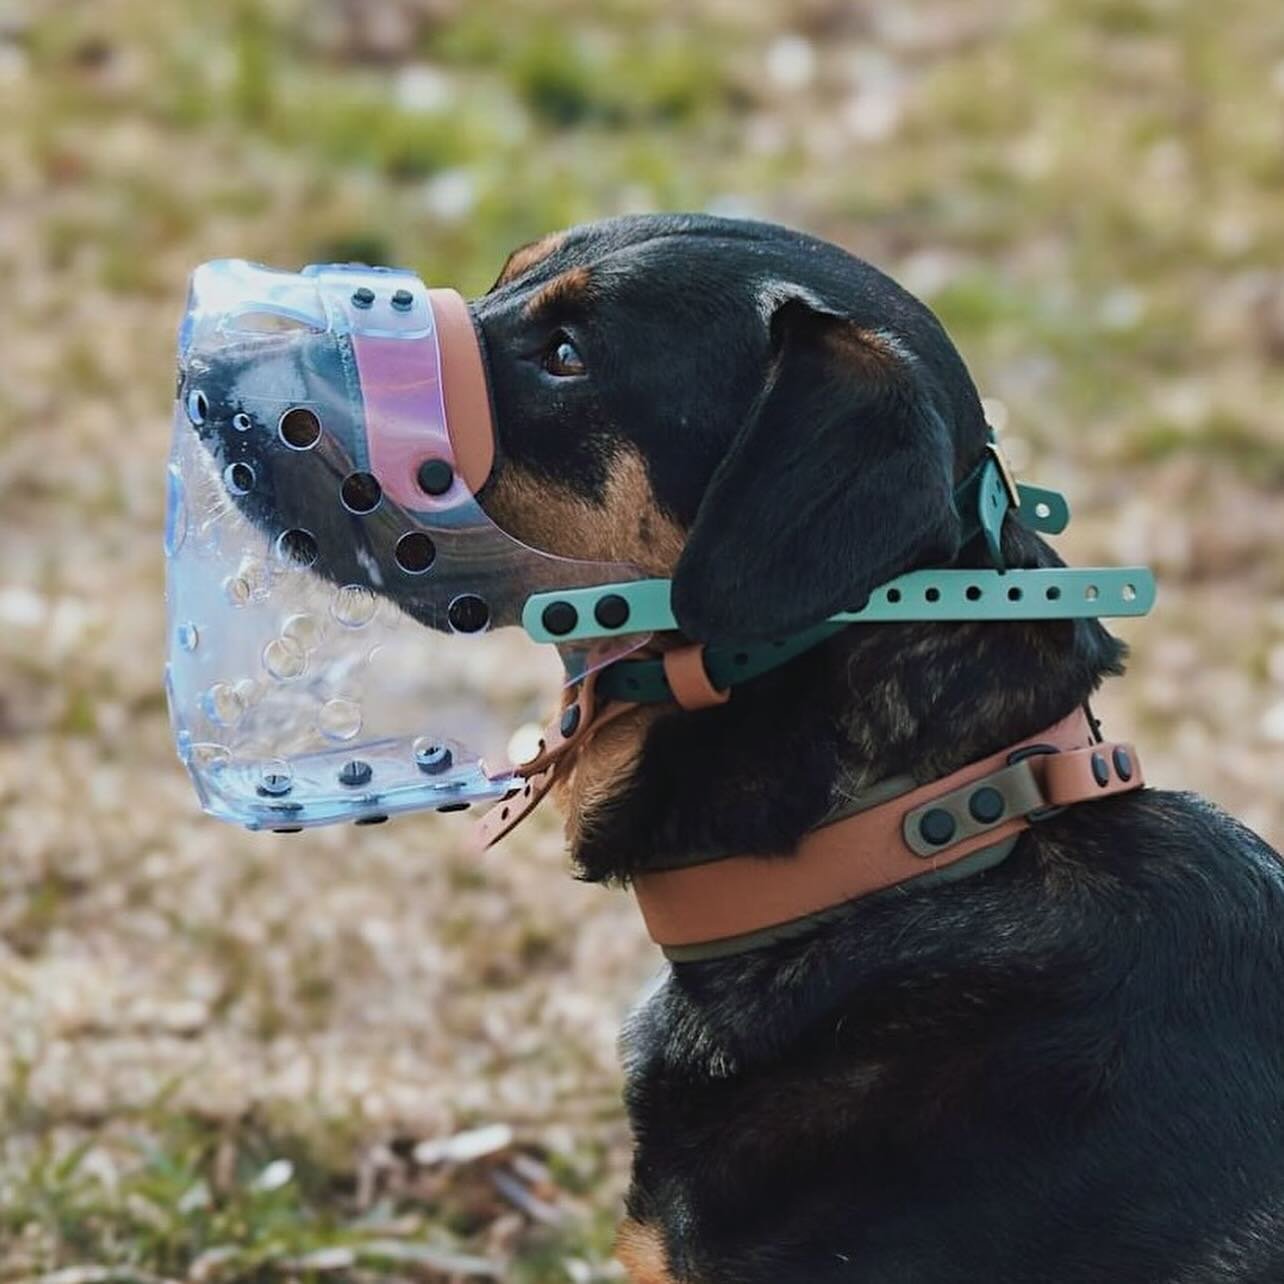 Chance decked out in Valisco from nose to tail 😍 Custom muzzle AND our popular handle collar! OBSESSED 🖤 
.
.
.
.
.
.
.
.
.
.
.
#vinylmuzzle #muzzle #muzzleup #muzzleddogsaregooddogs #biothane #biothanecollar #handlecollar #custommuzzle #biothanedo